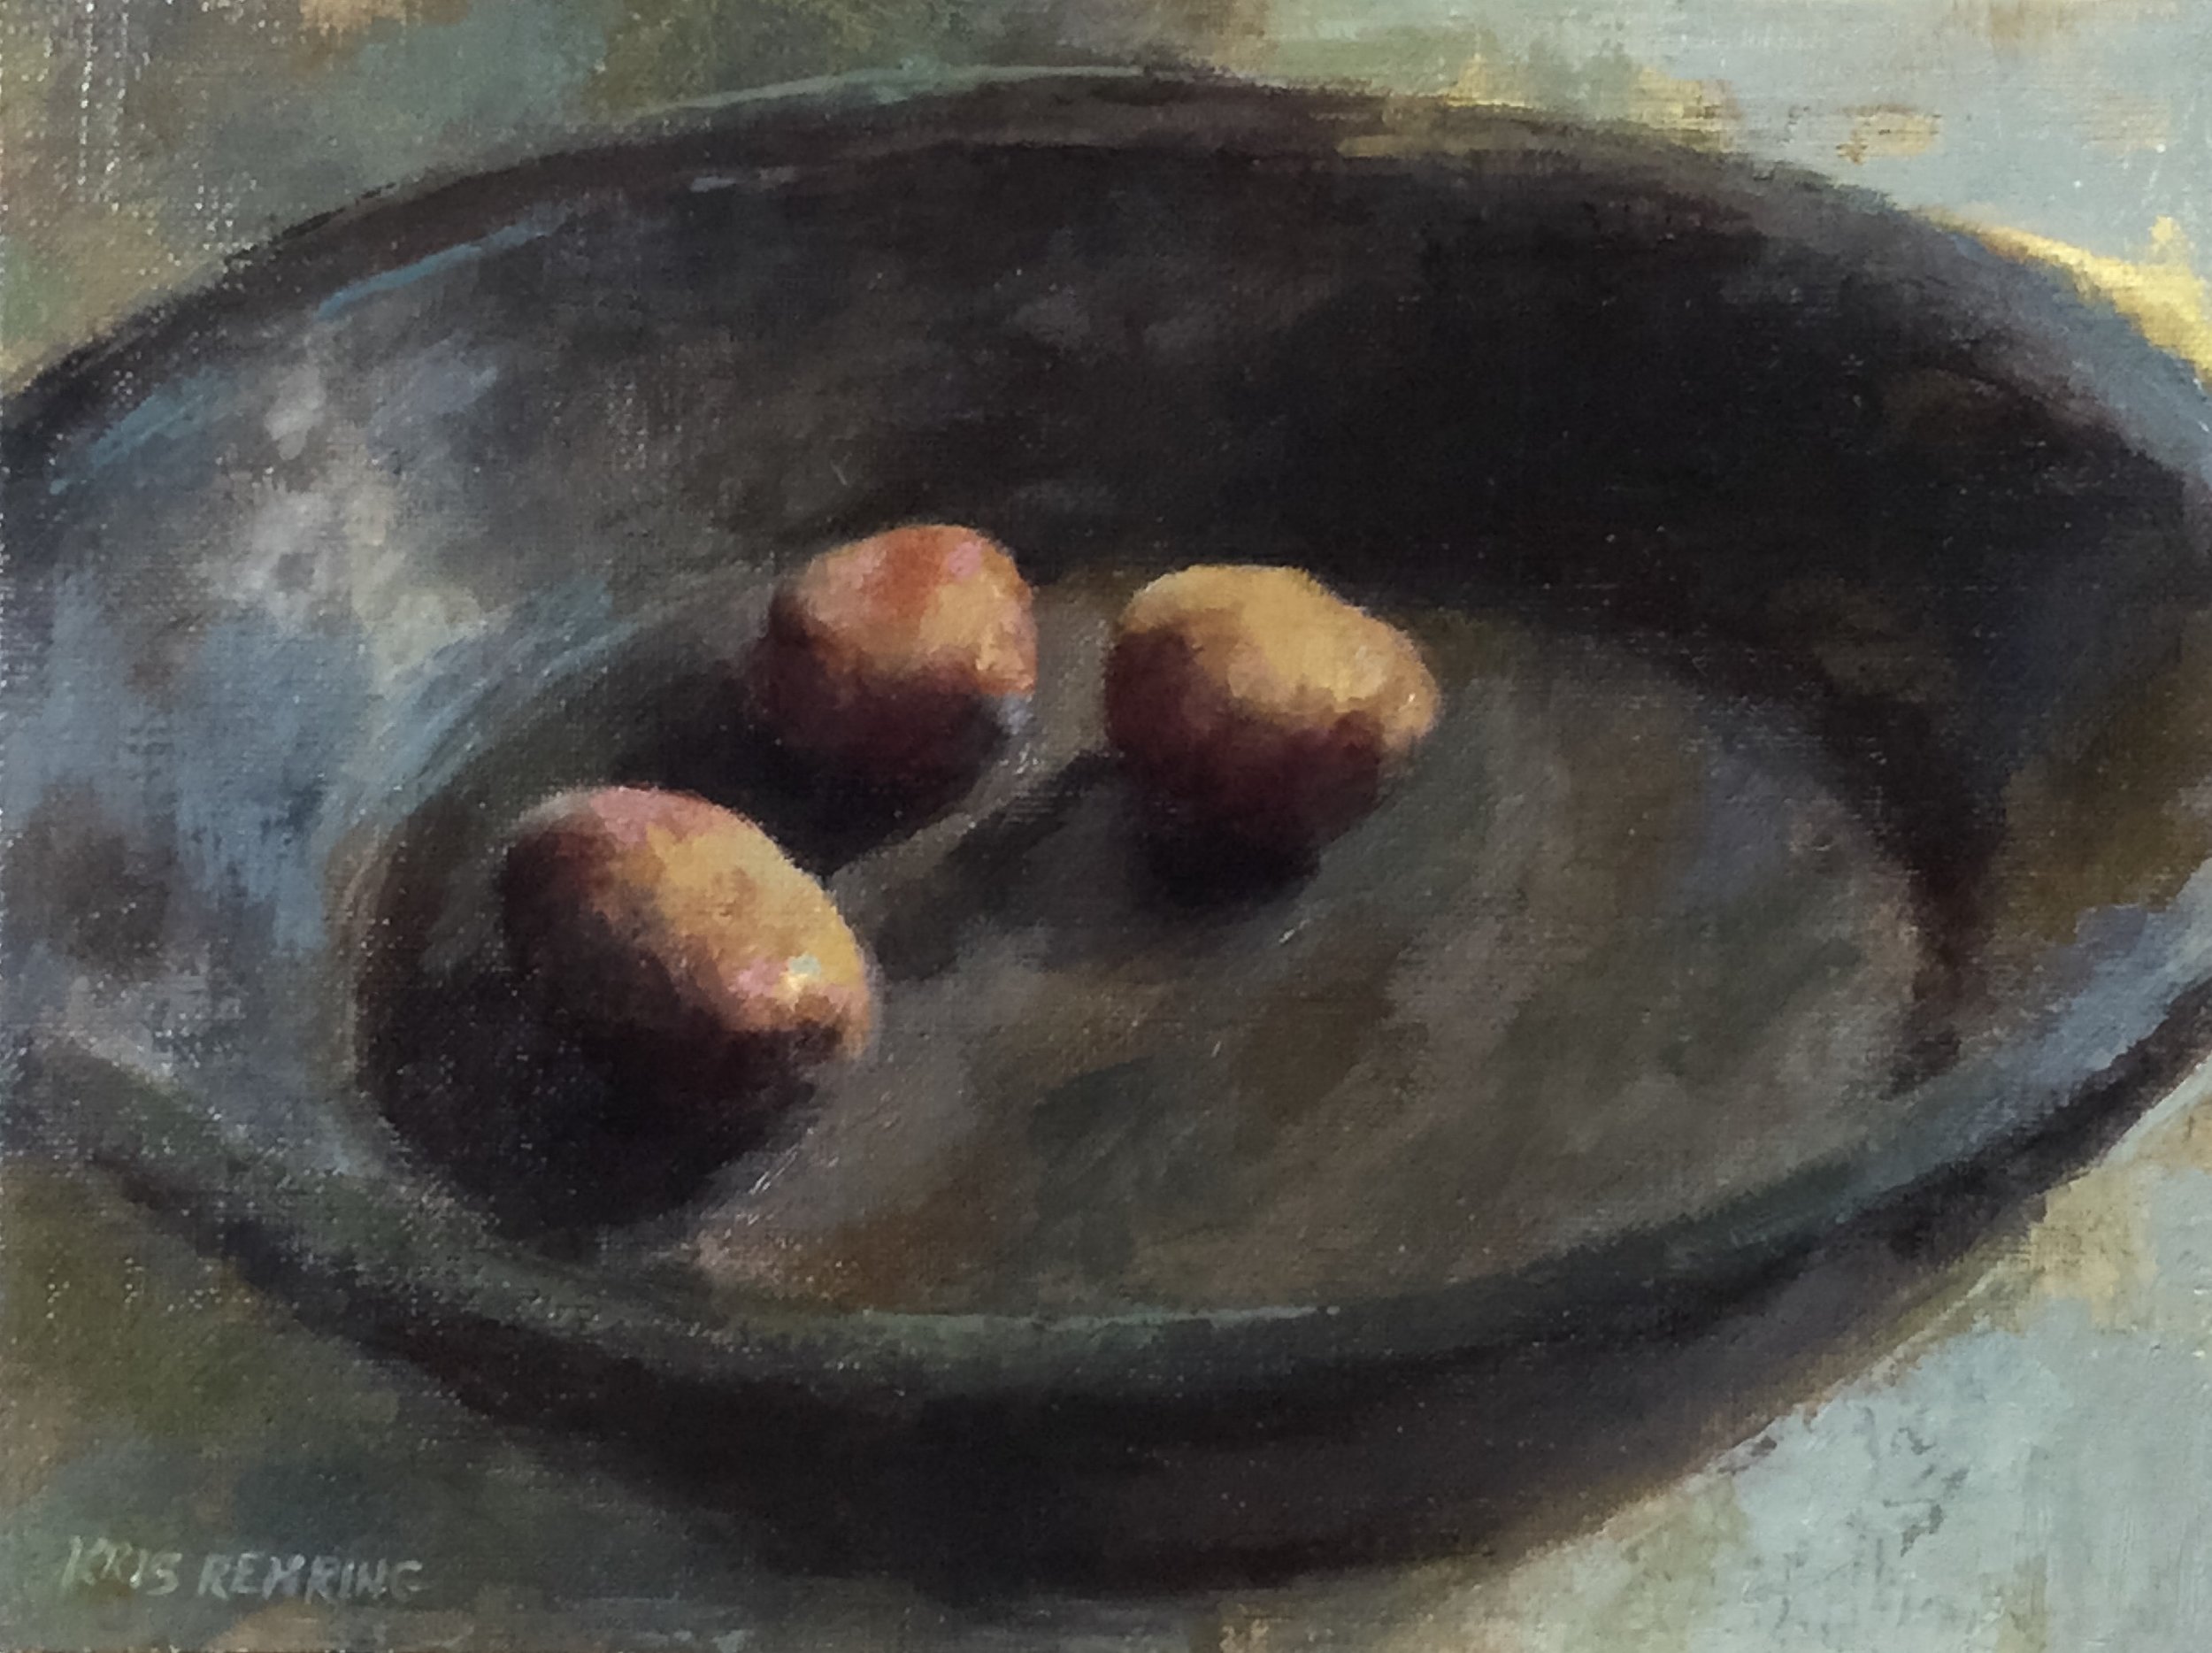 New Potatoes in Black Wooden Bowl